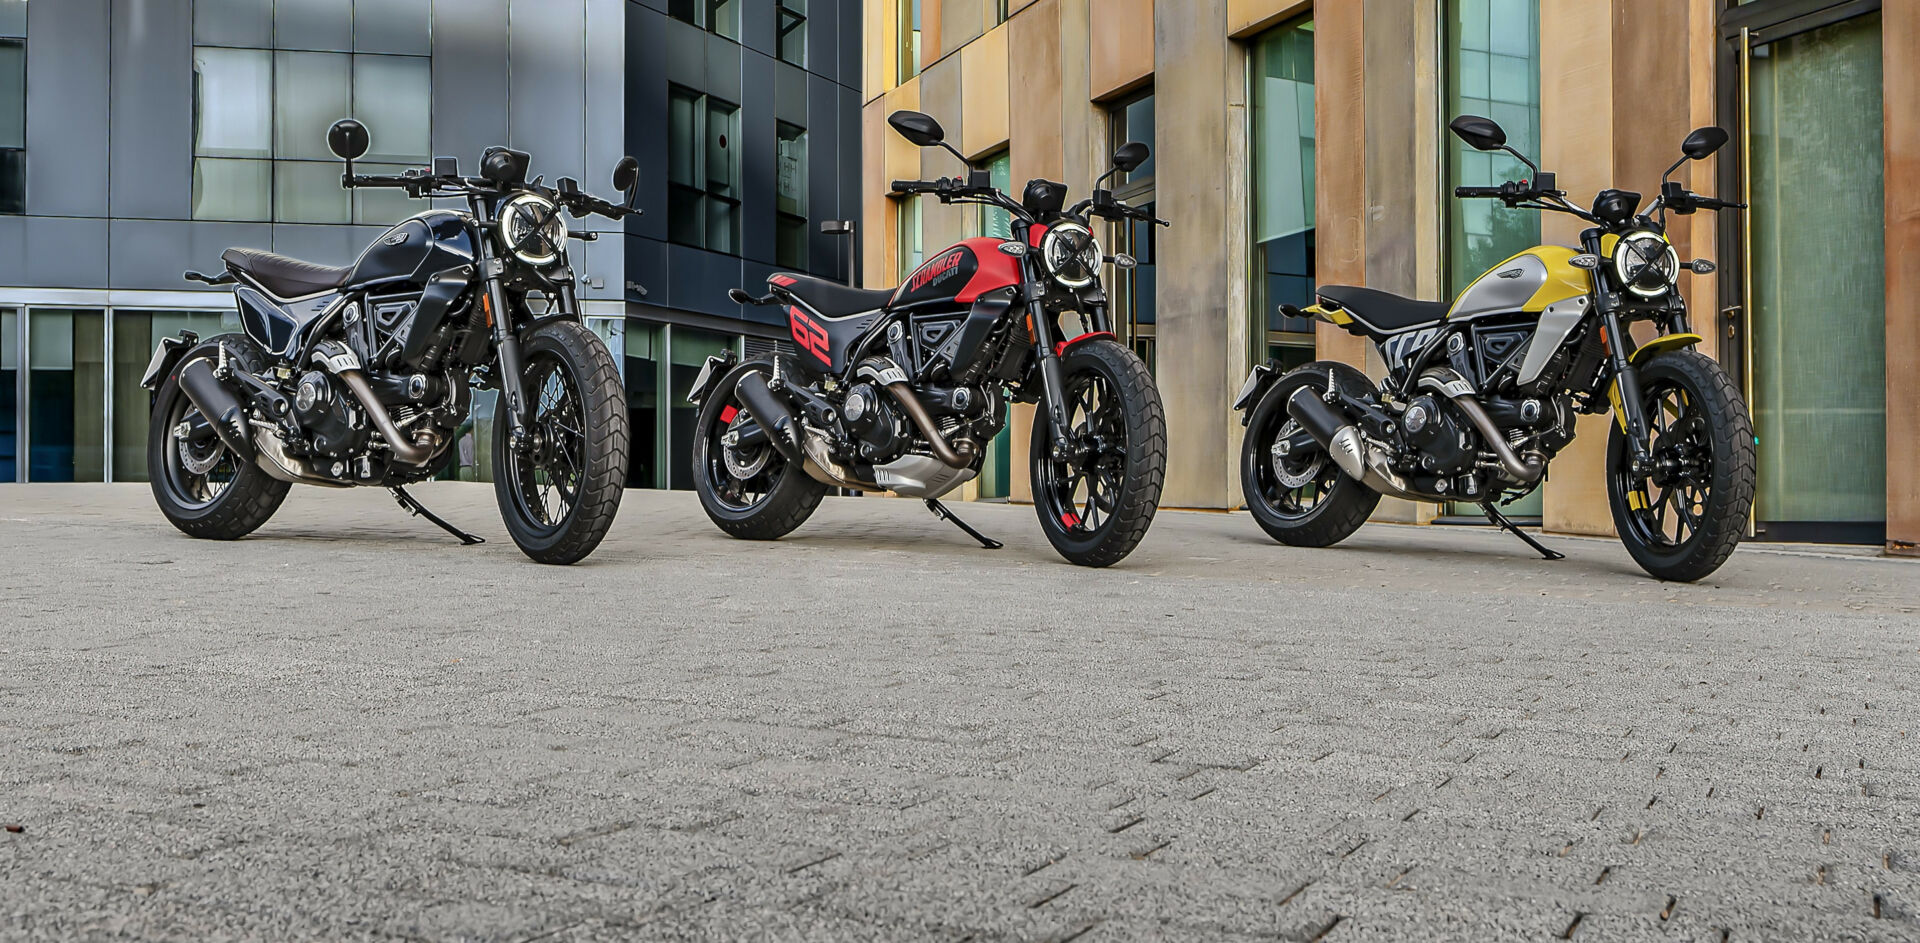 Ducati's 2023 Scrambler lineup (from left): Nightshift, Full Throttle, and Icon. Photo courtesy Ducati.